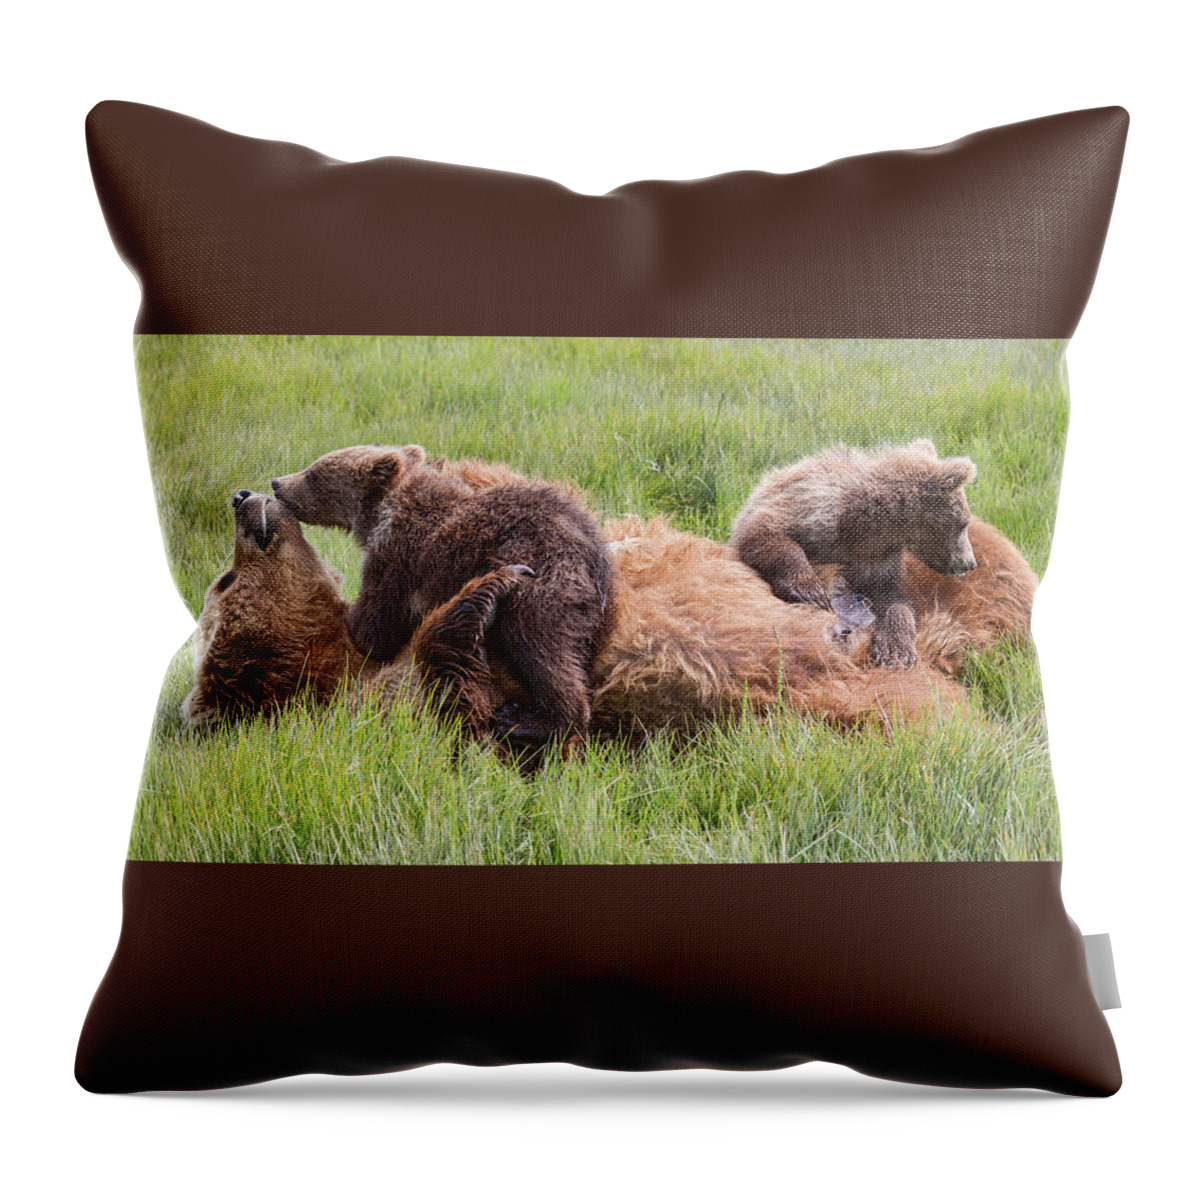 Grizzly Bears Throw Pillow featuring the photograph Mother Grizzly Suckling Twin Cubs by Mark Harrington